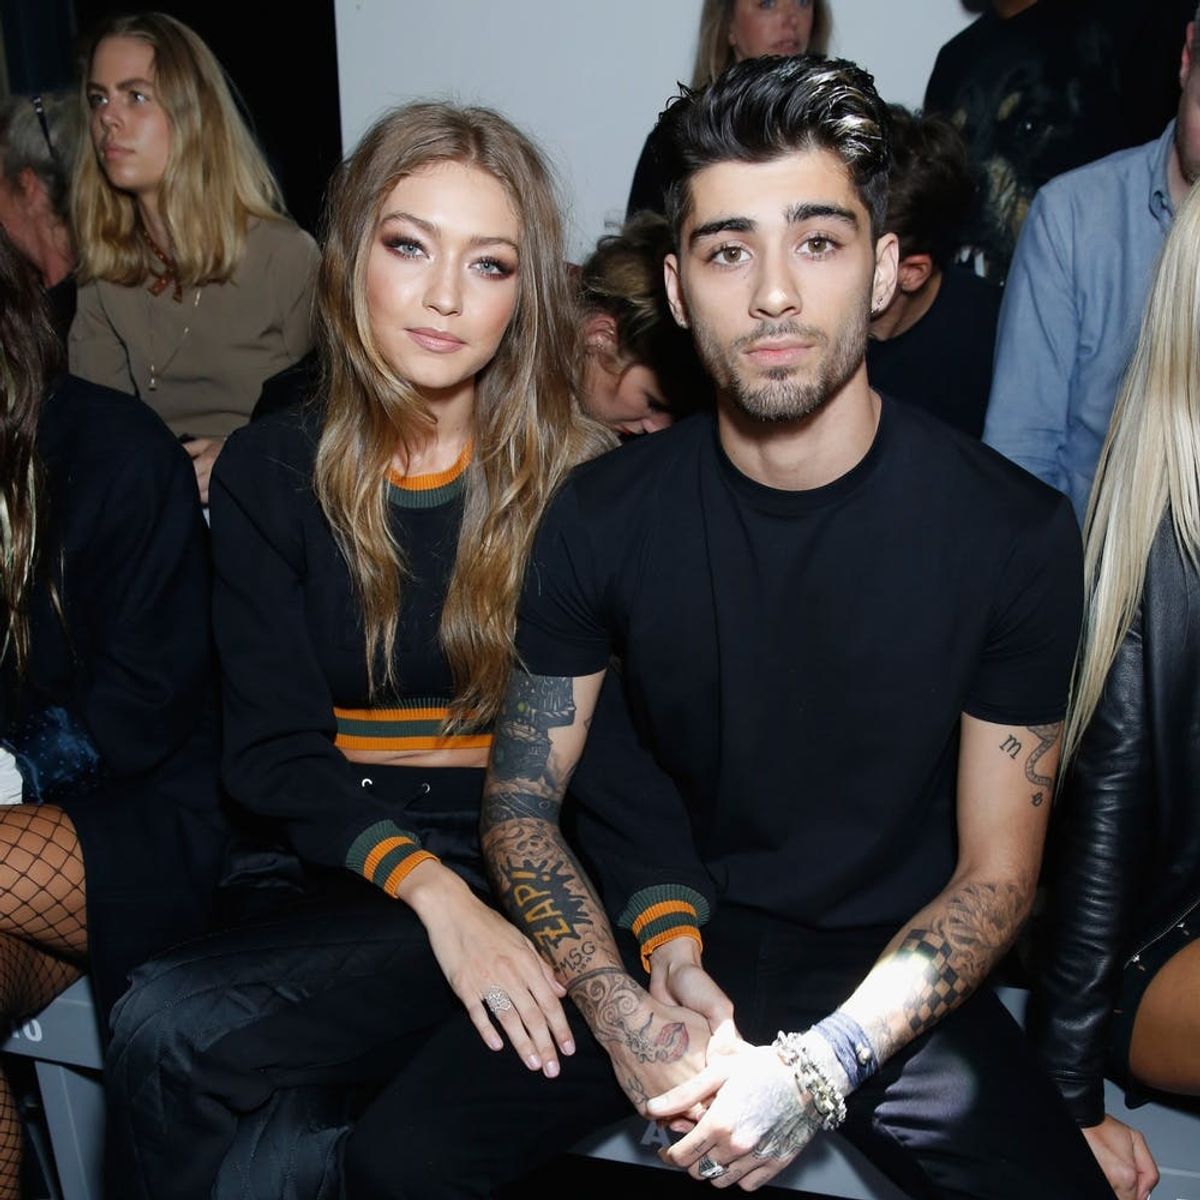 This Is the Awesome One-Liner Gigi Hadid Used to Break the Ice on Her First Date With Zayn Malik